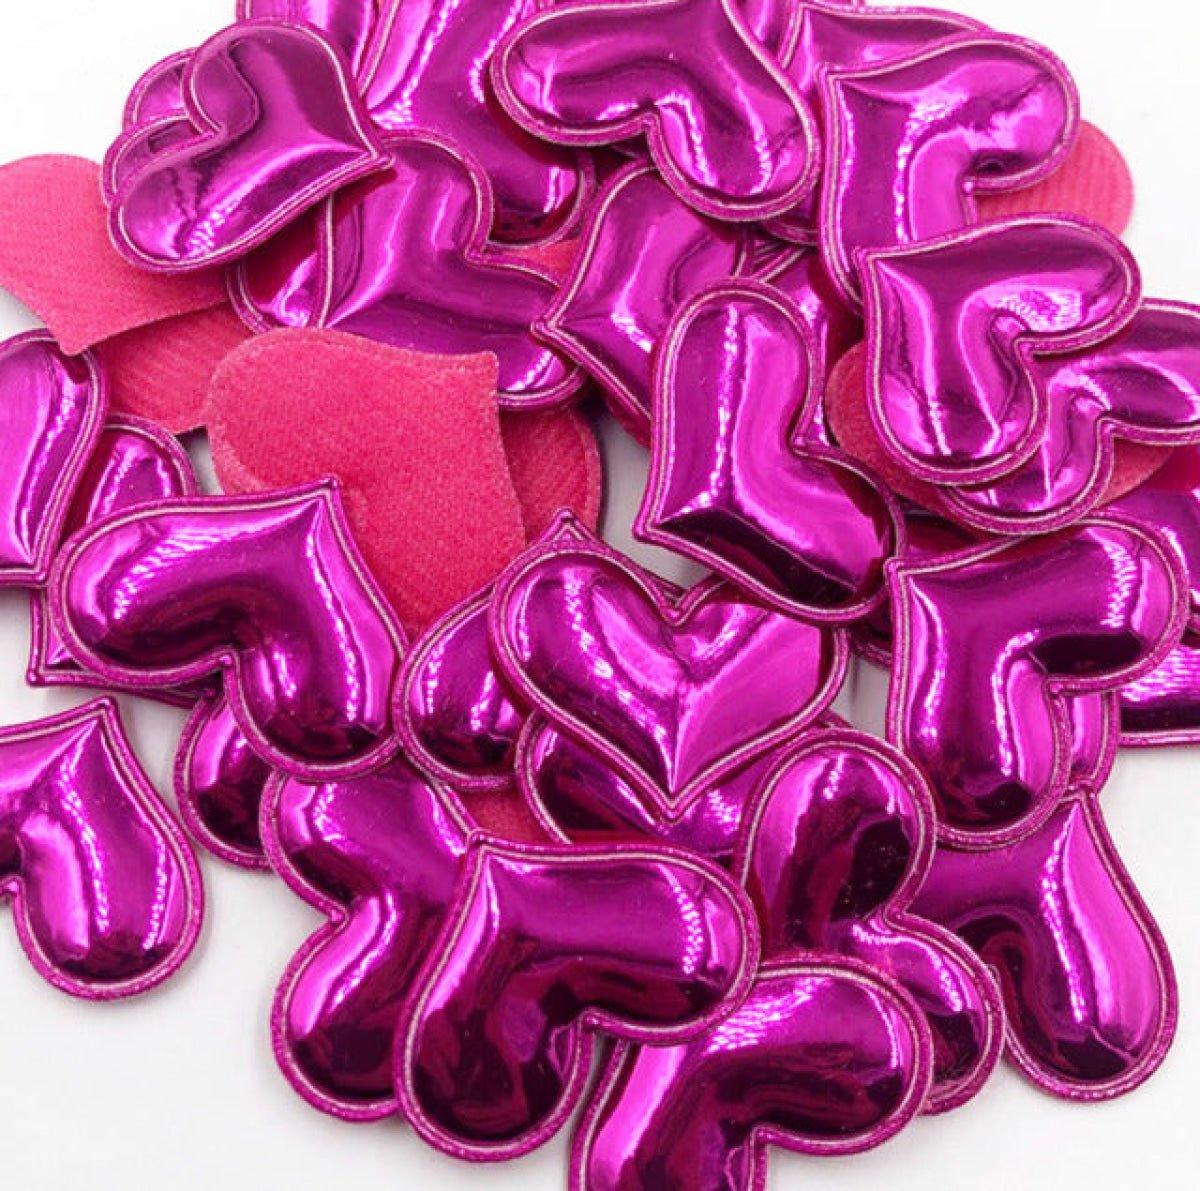 100pcs Glossy Shiny Padded Patches Heart Shape Garment Appliques For Decoration DIY Accessories Toy Craft Clothing PU Leather - Dark Pink - - Asia Sell